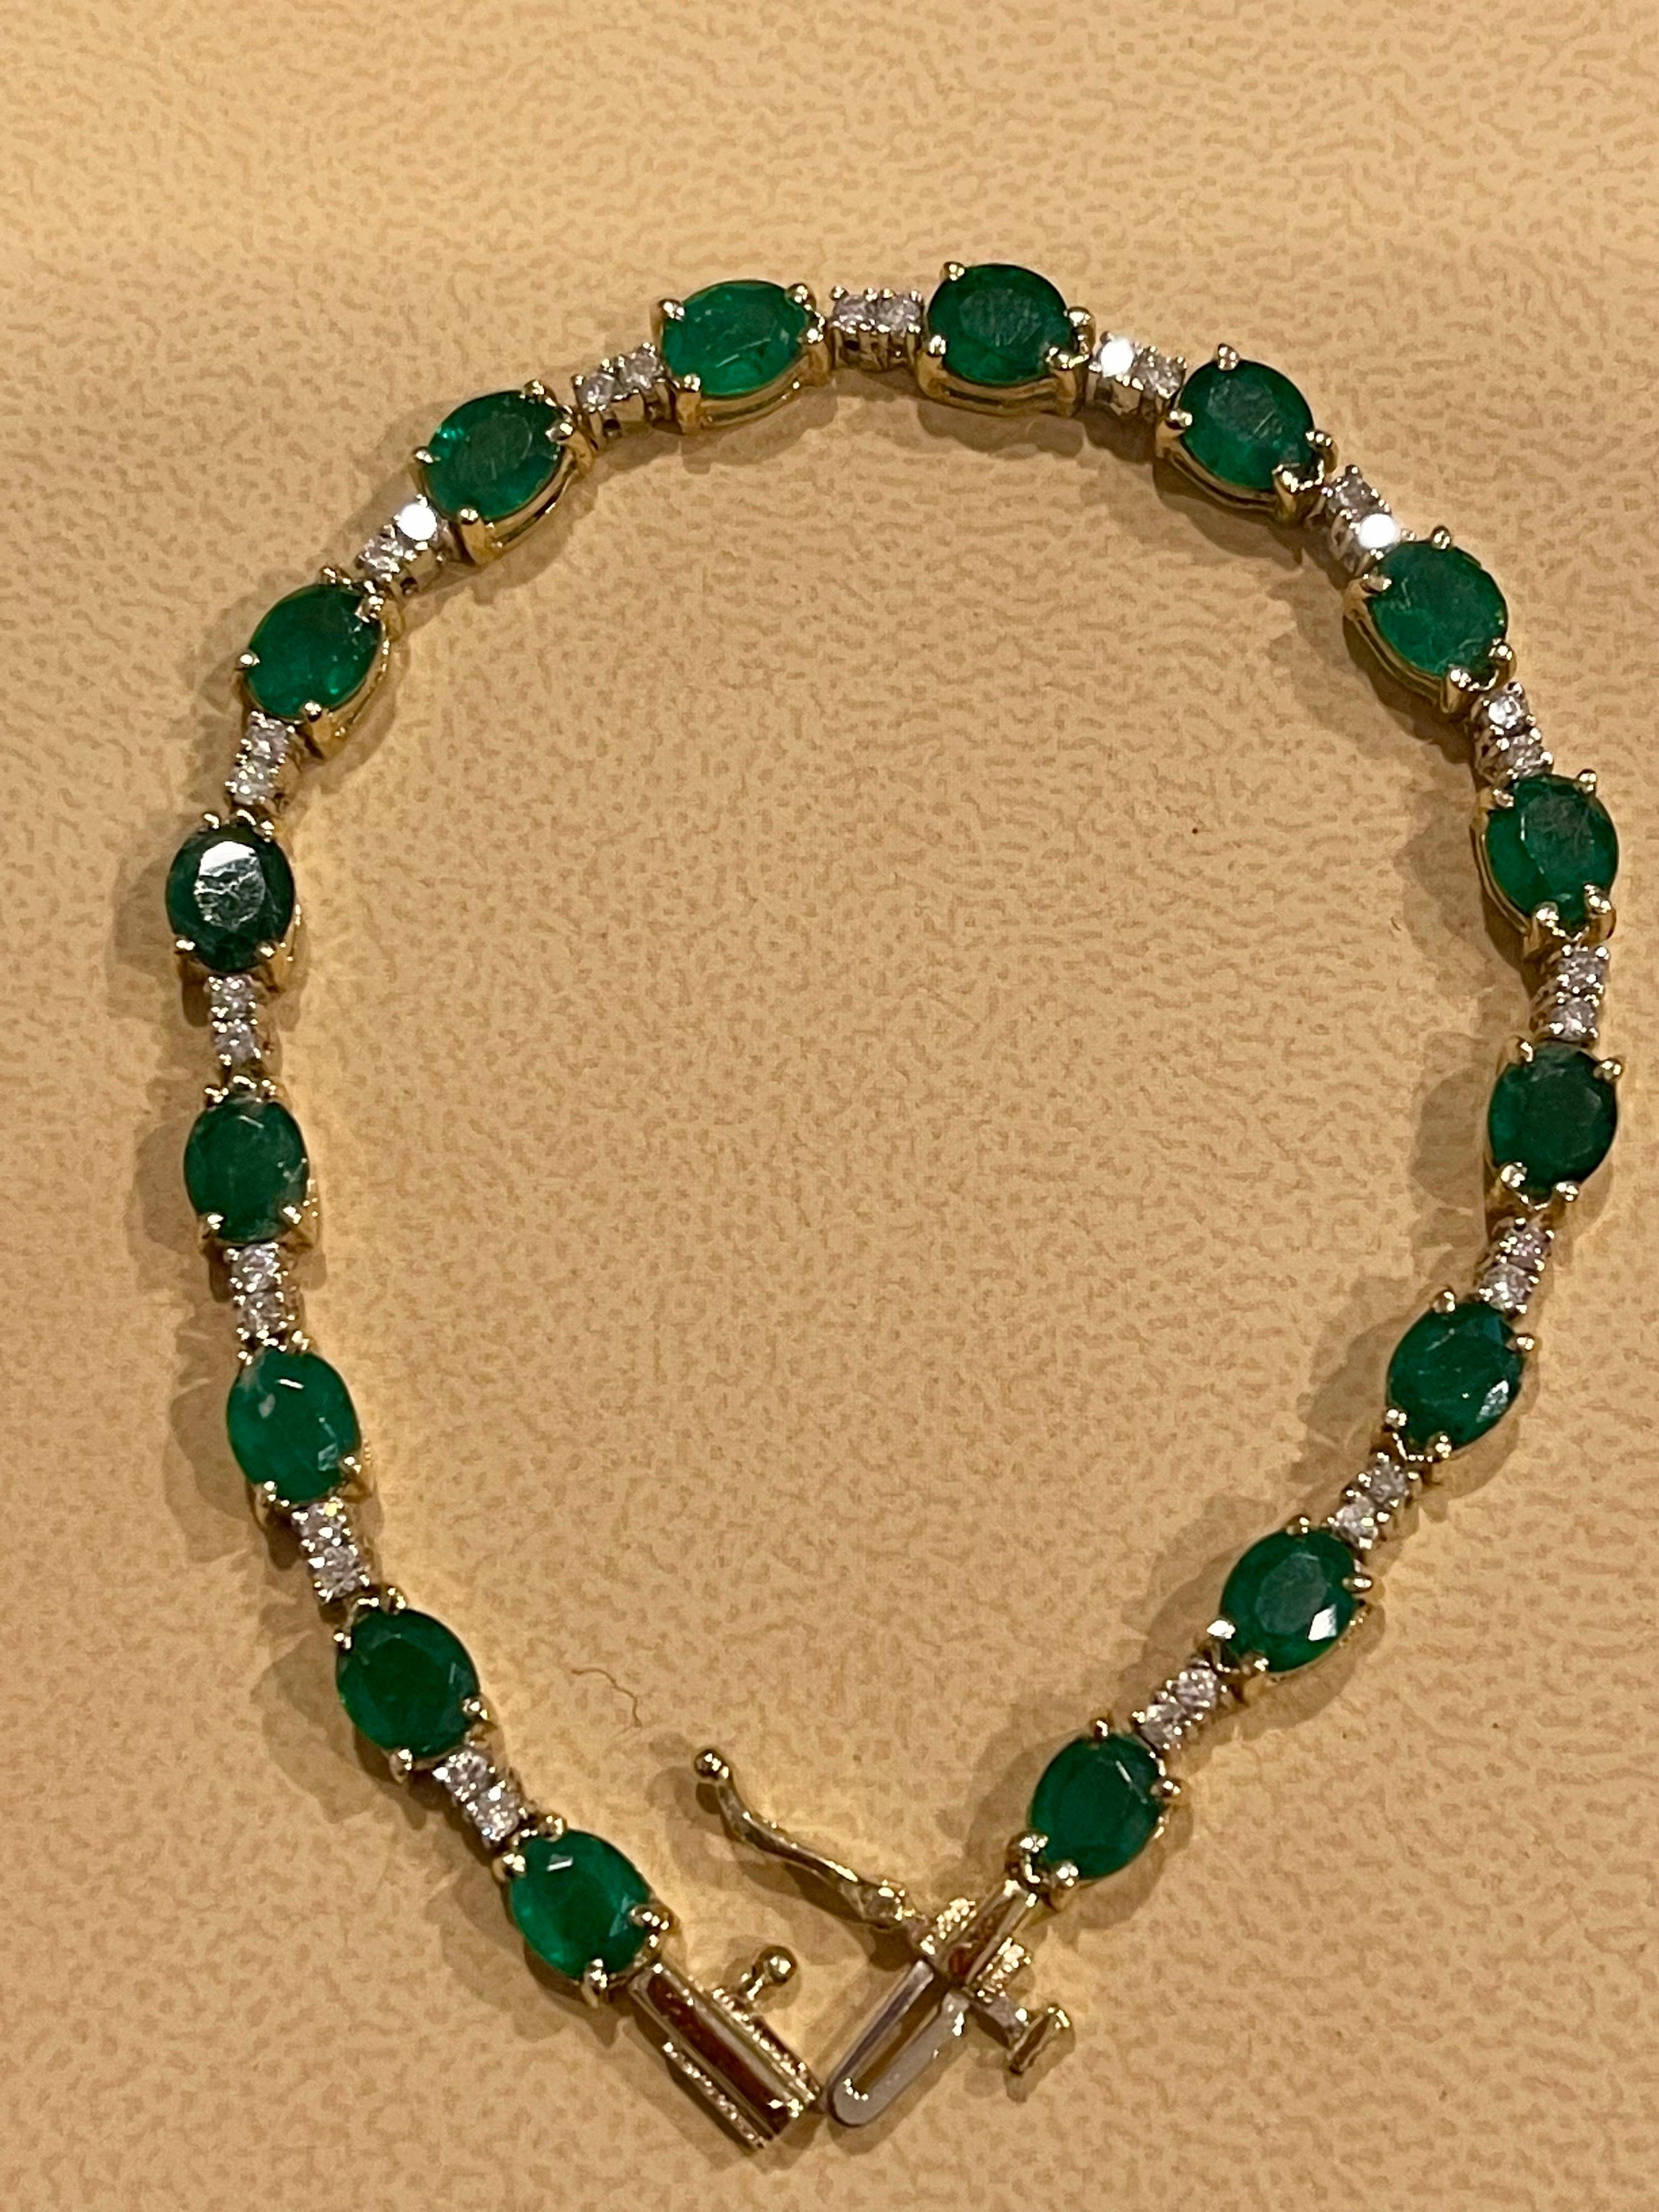 8 Ct Natural Brazilian Emerald and Diamond Tennis Bracelet 14 Karat Yellow Gold In New Condition For Sale In New York, NY